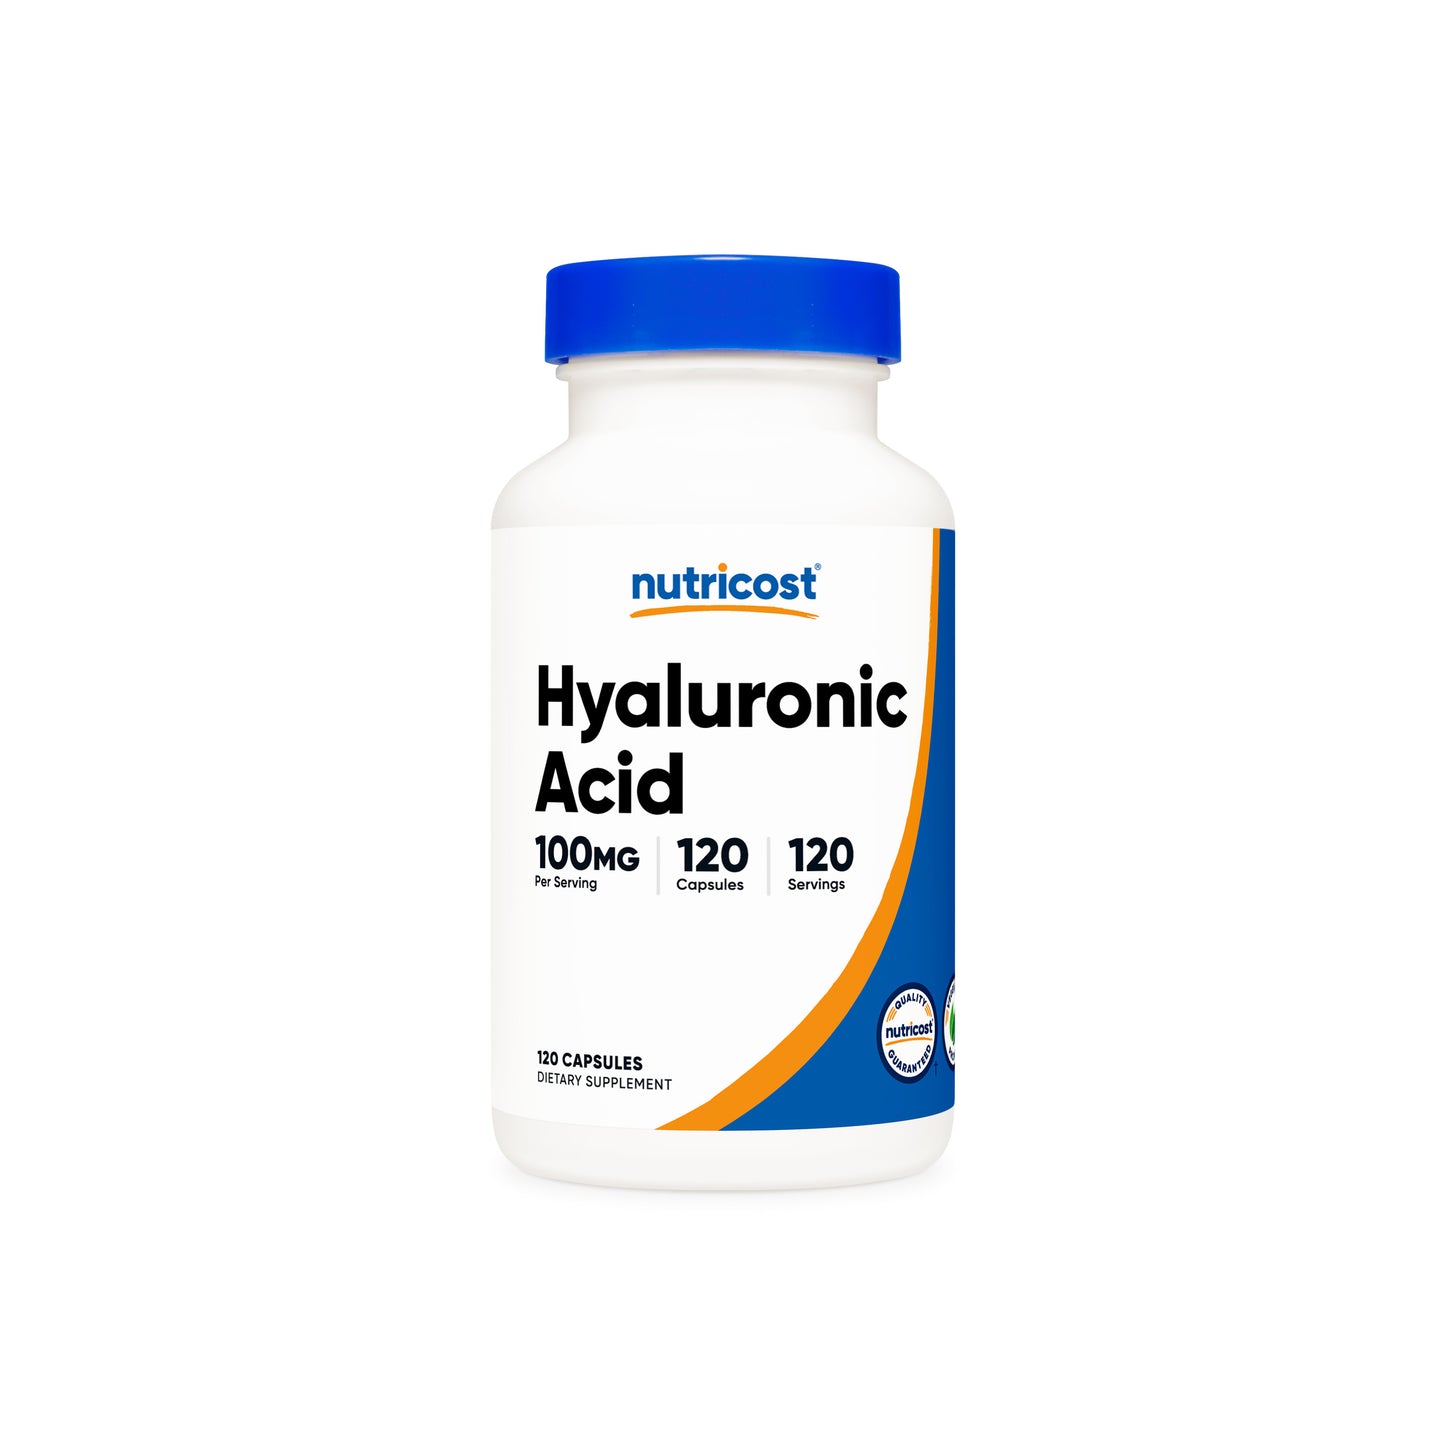 Nutricost Hyaluronic Acid Capsules